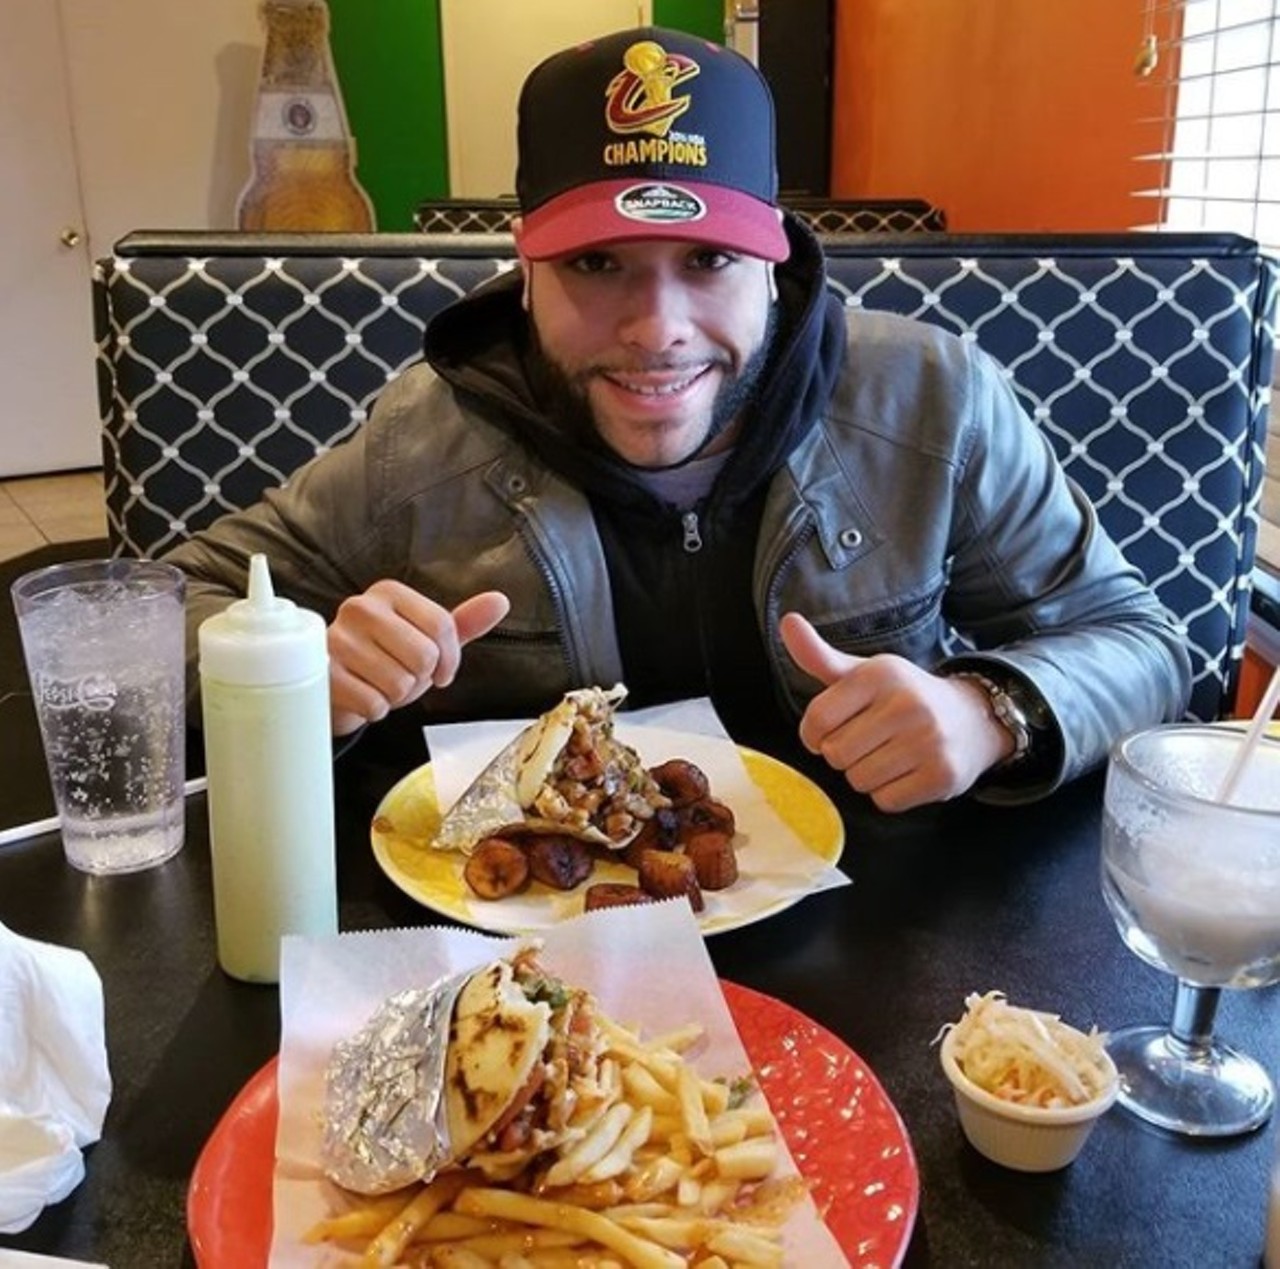  El Arepazo y Pupuseria
22799 Lorain Rd., 440-716-1961
Meals are often served with fries and a trio of sauces. In addition to tamales, the restaurant prepares crispy fried empanadas filled with cheese, pork or beef.
samuelnoyola13/Instagram